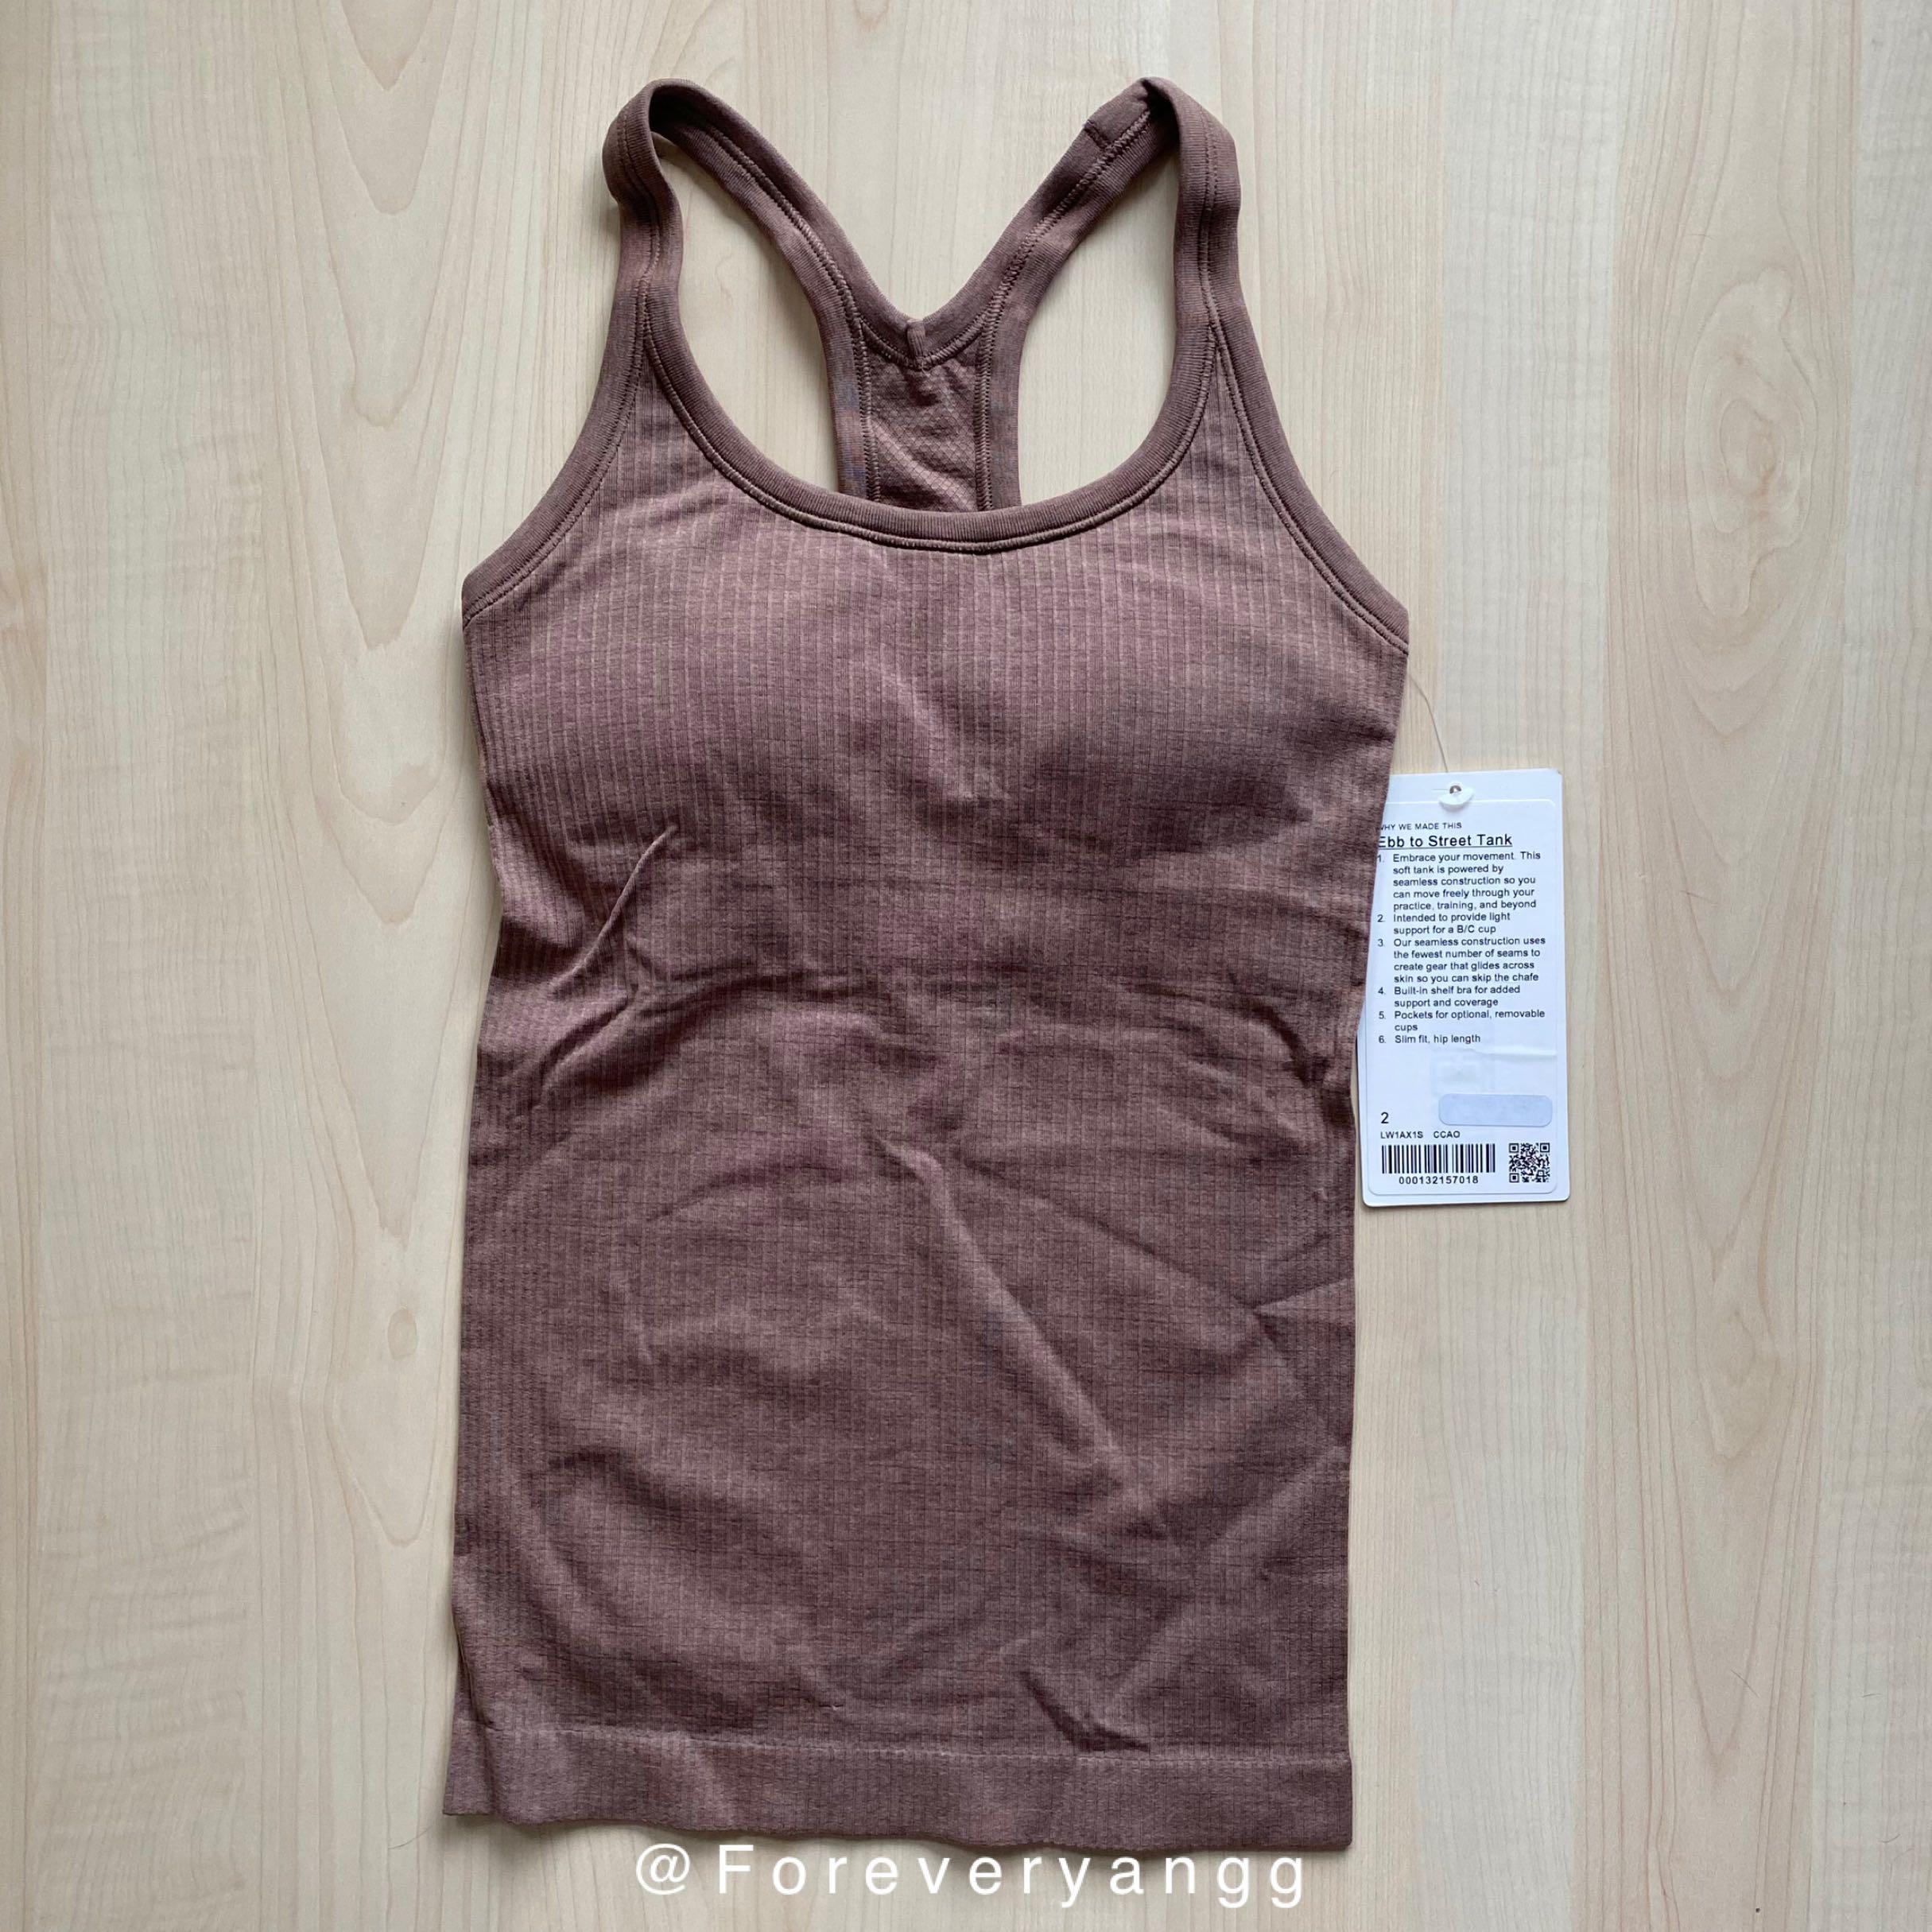 Lululemon Pink Lychee Ebb To Street Cropped Racerback Tank Top Size 4 - $52  New With Tags - From Lululemon